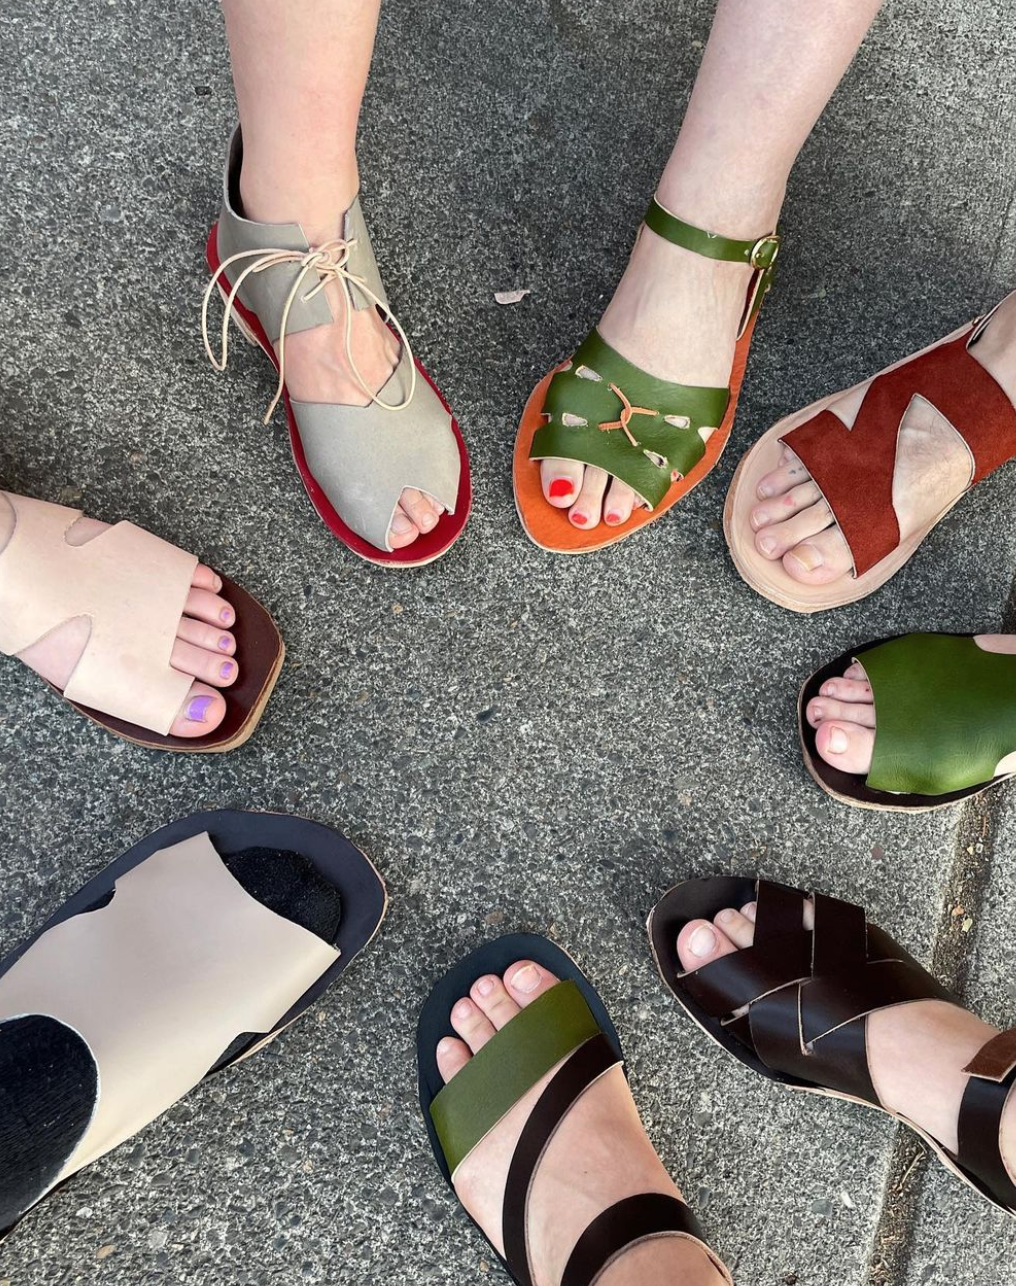 AUG 4th IN-PERSON - Sandal Making Workshop with Rachel Corry